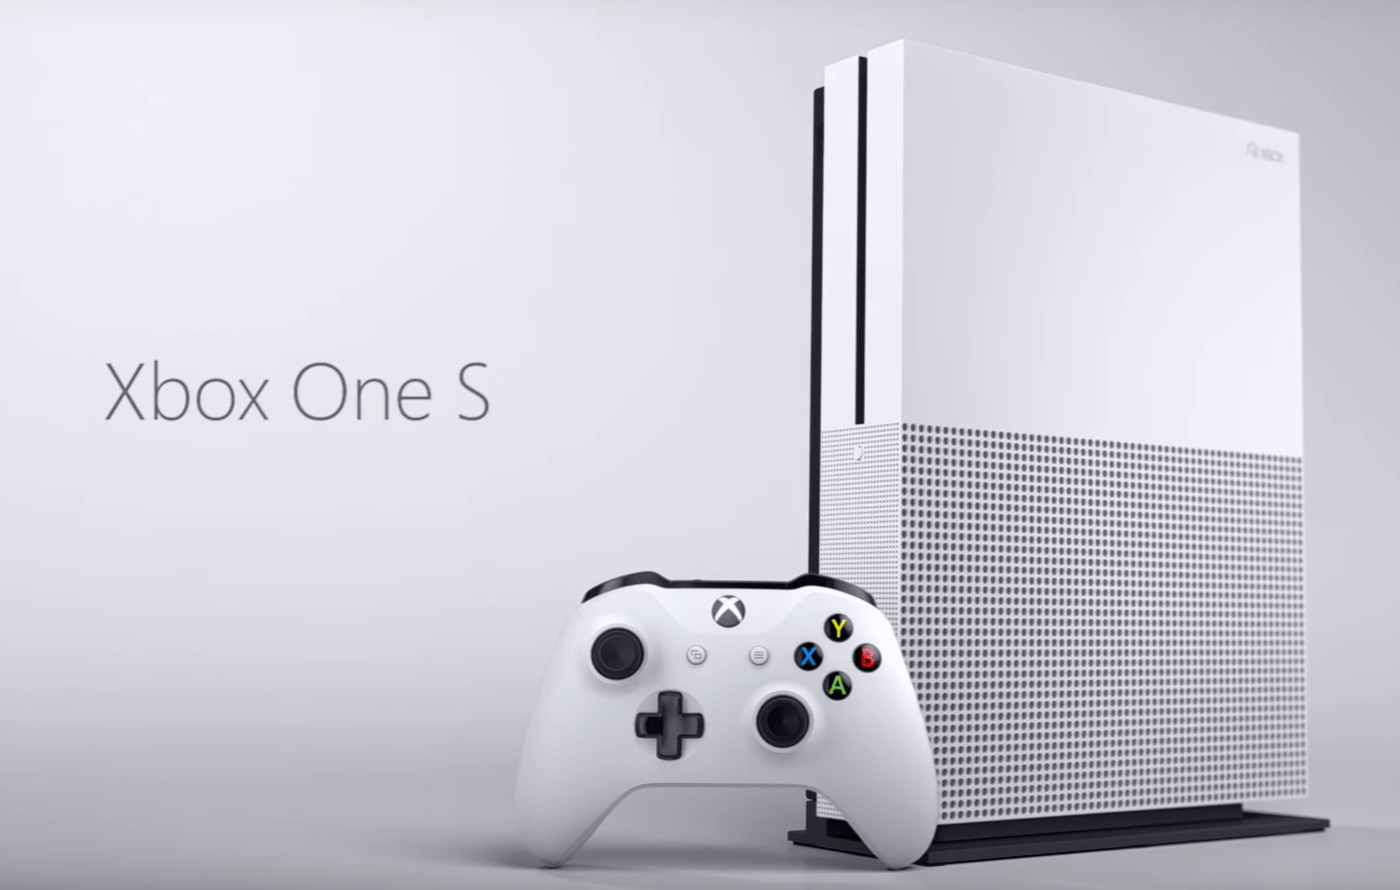 Five reasons why you need the Xbox One S in your life